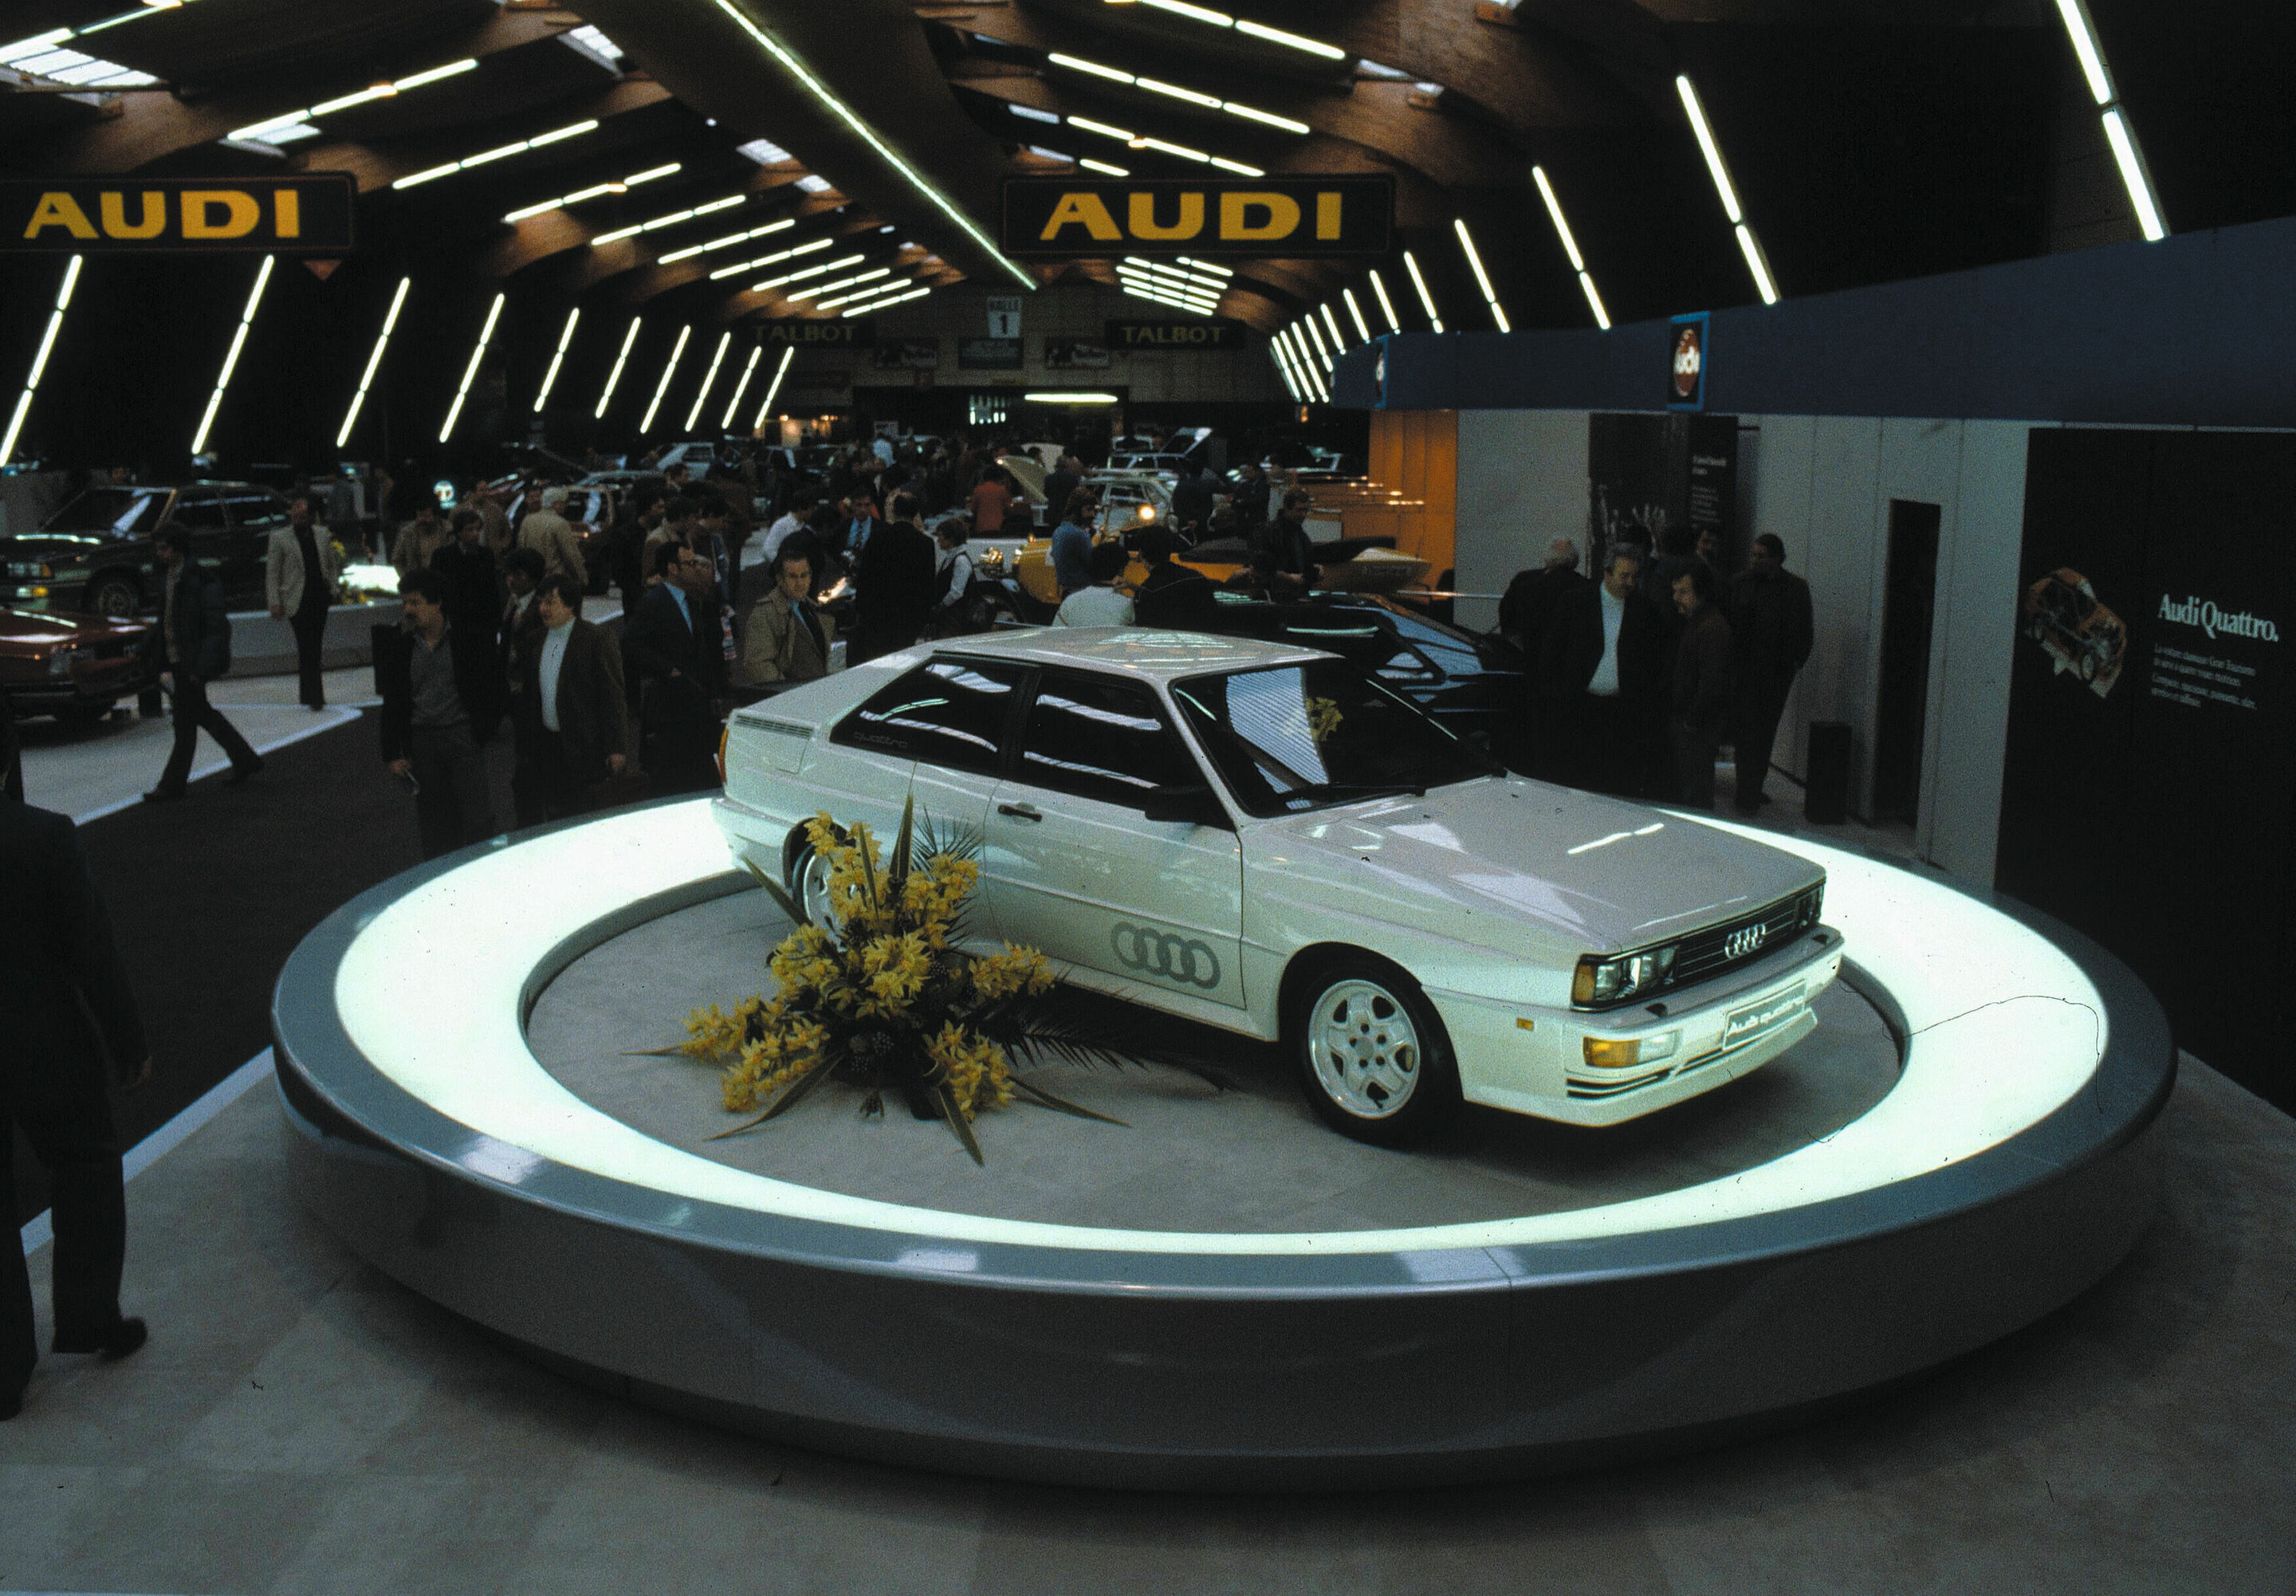 40 years, 40 figures, 40 images: fascinating facts and tales about Audi’s quattro technology